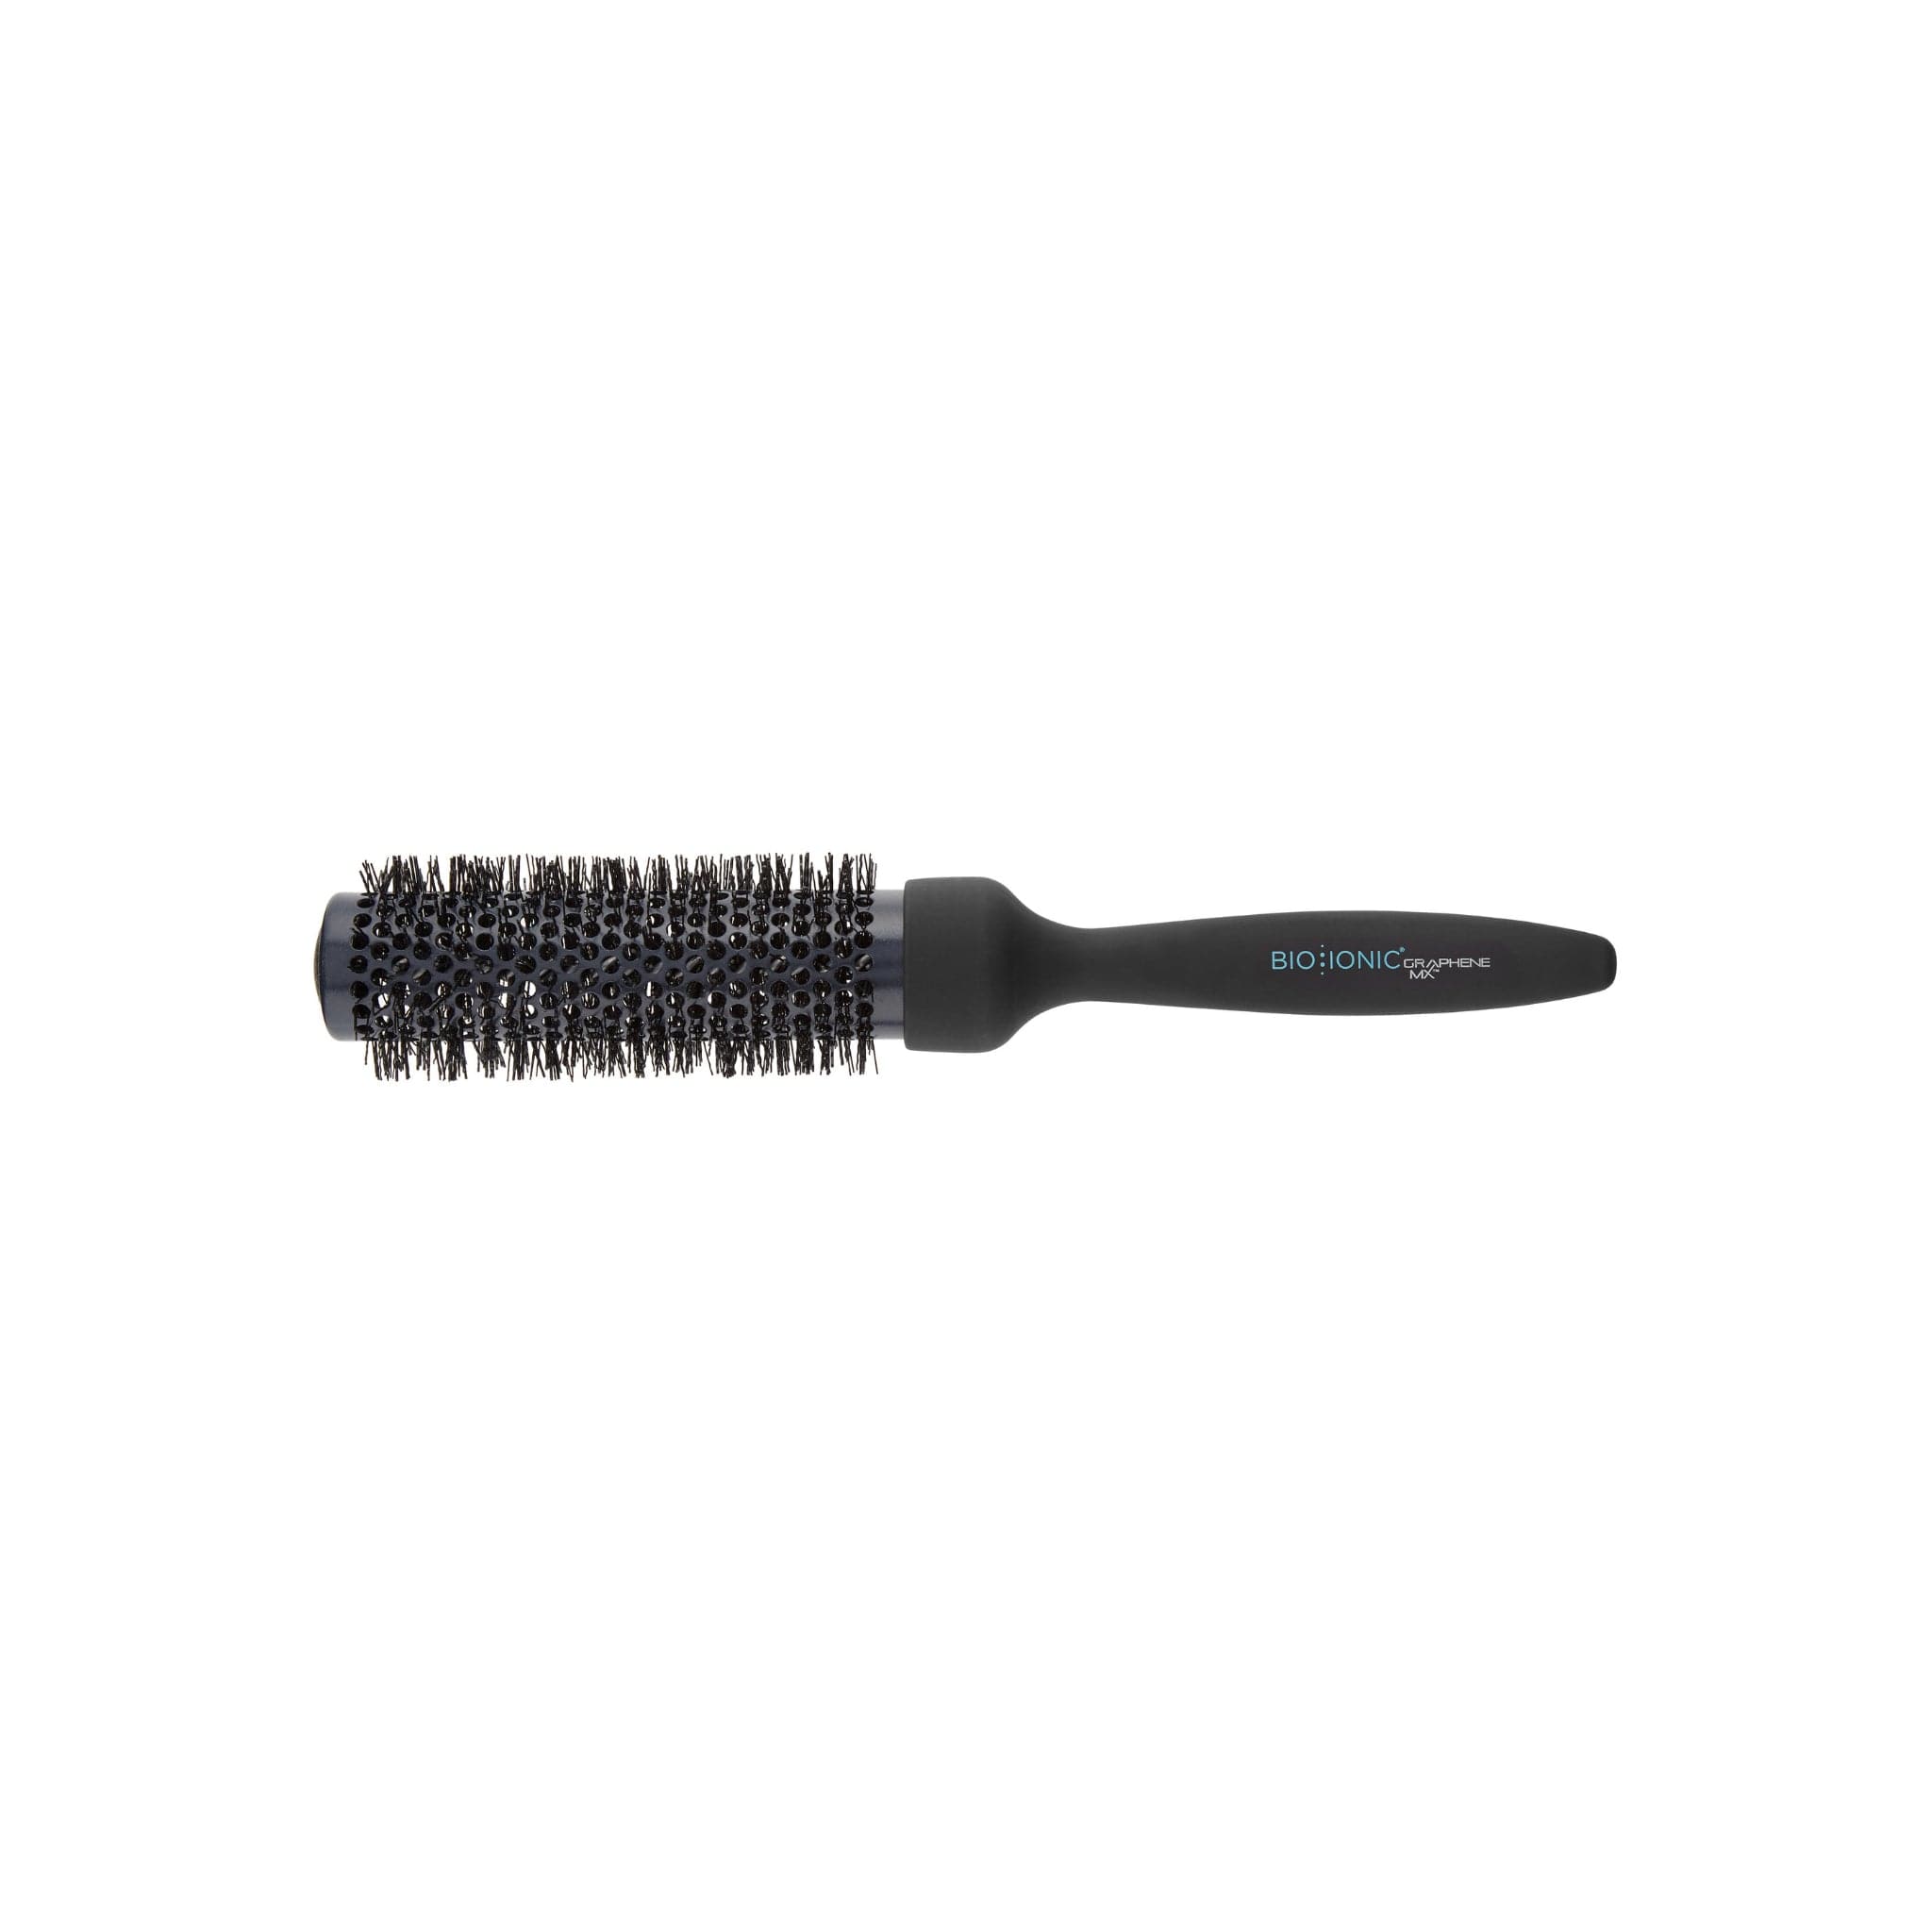 MX Thermal Styling Brush